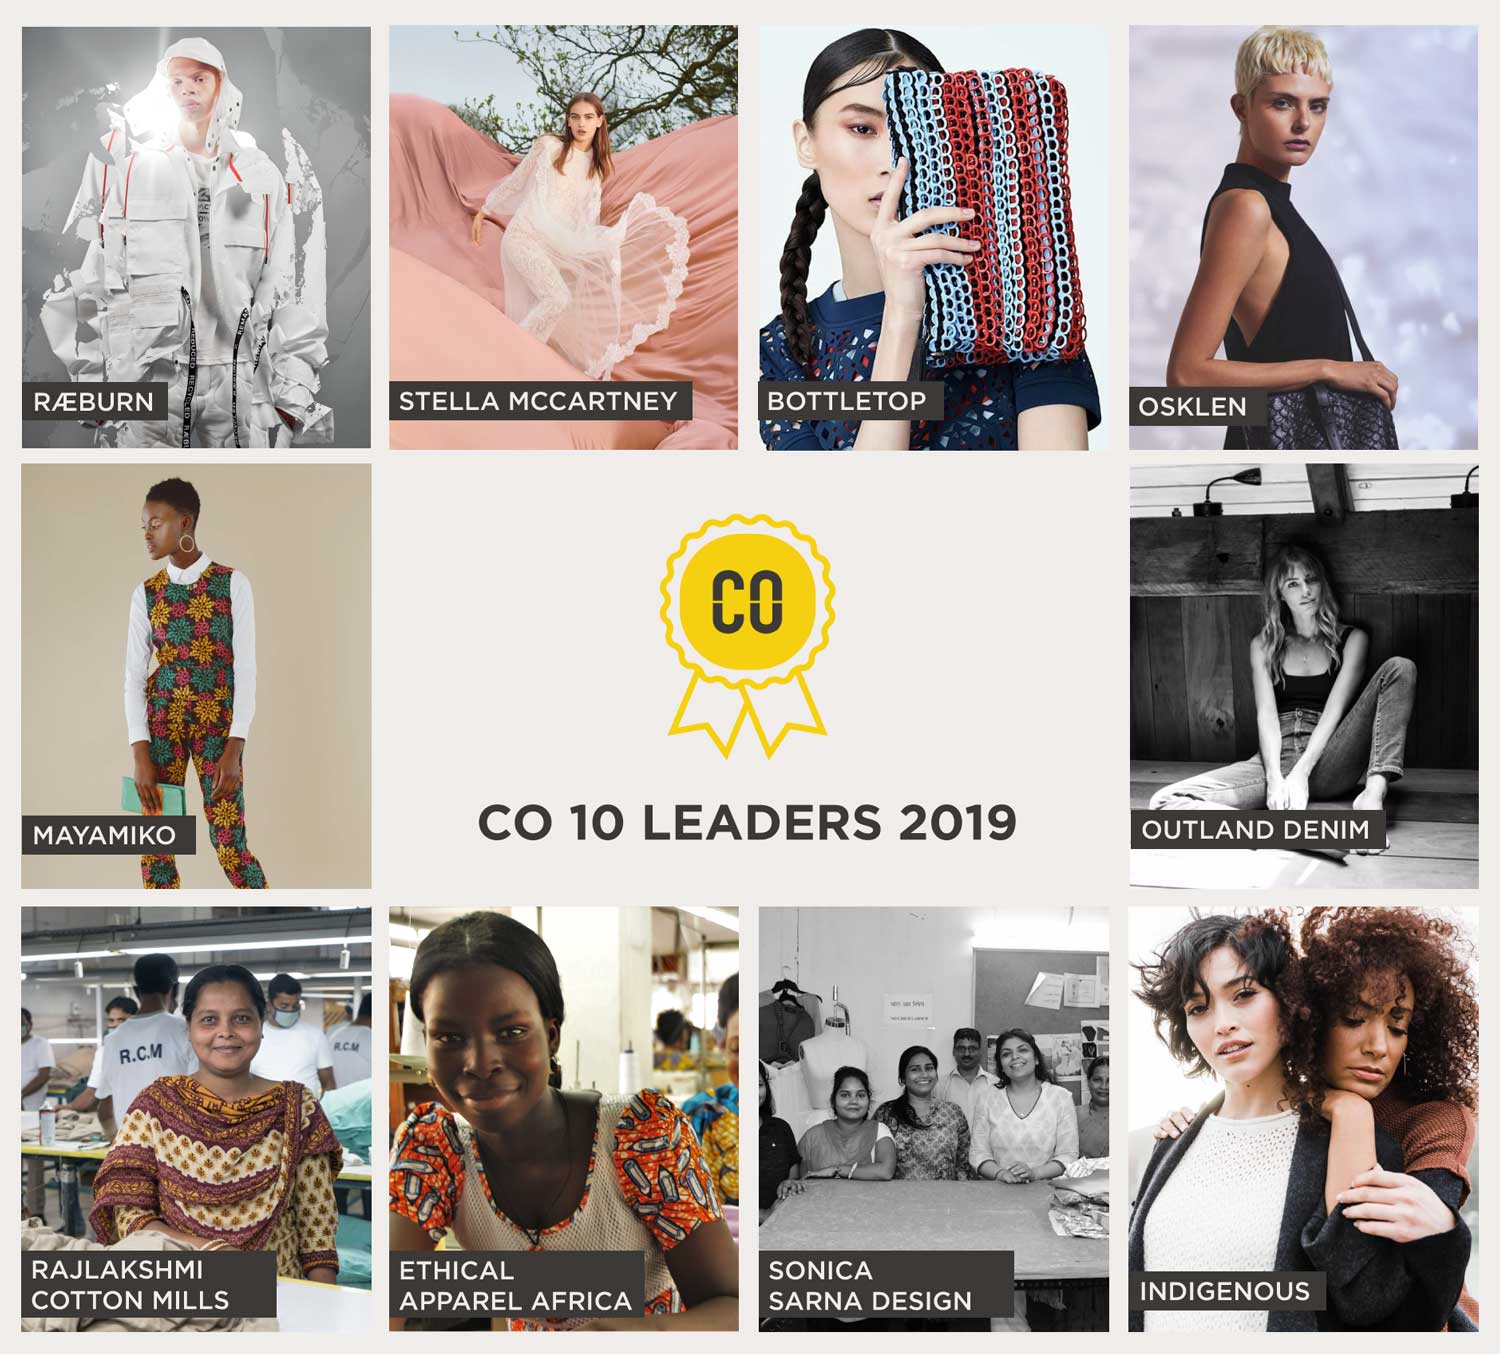 Sustainable fashion businesses win leadership award, judged by leaders from Vogue, GQ